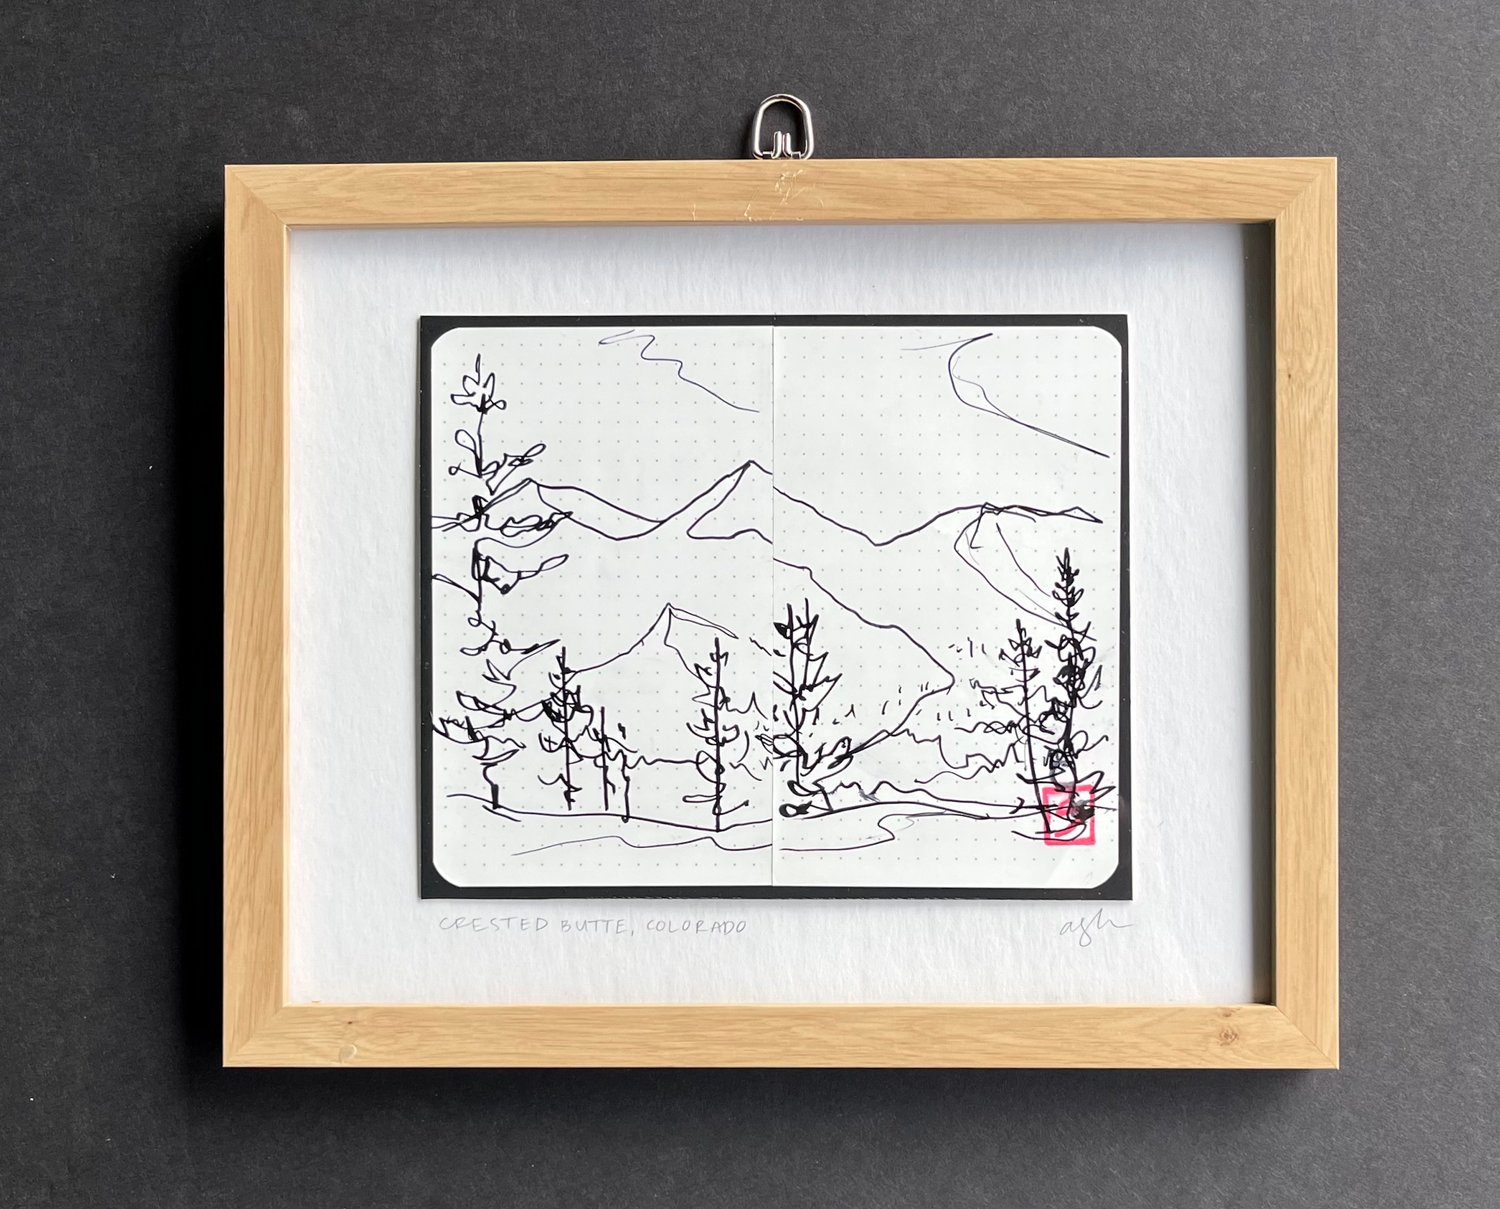 Crested Butte, Colorado [Field Notes Plein Air Drawing]